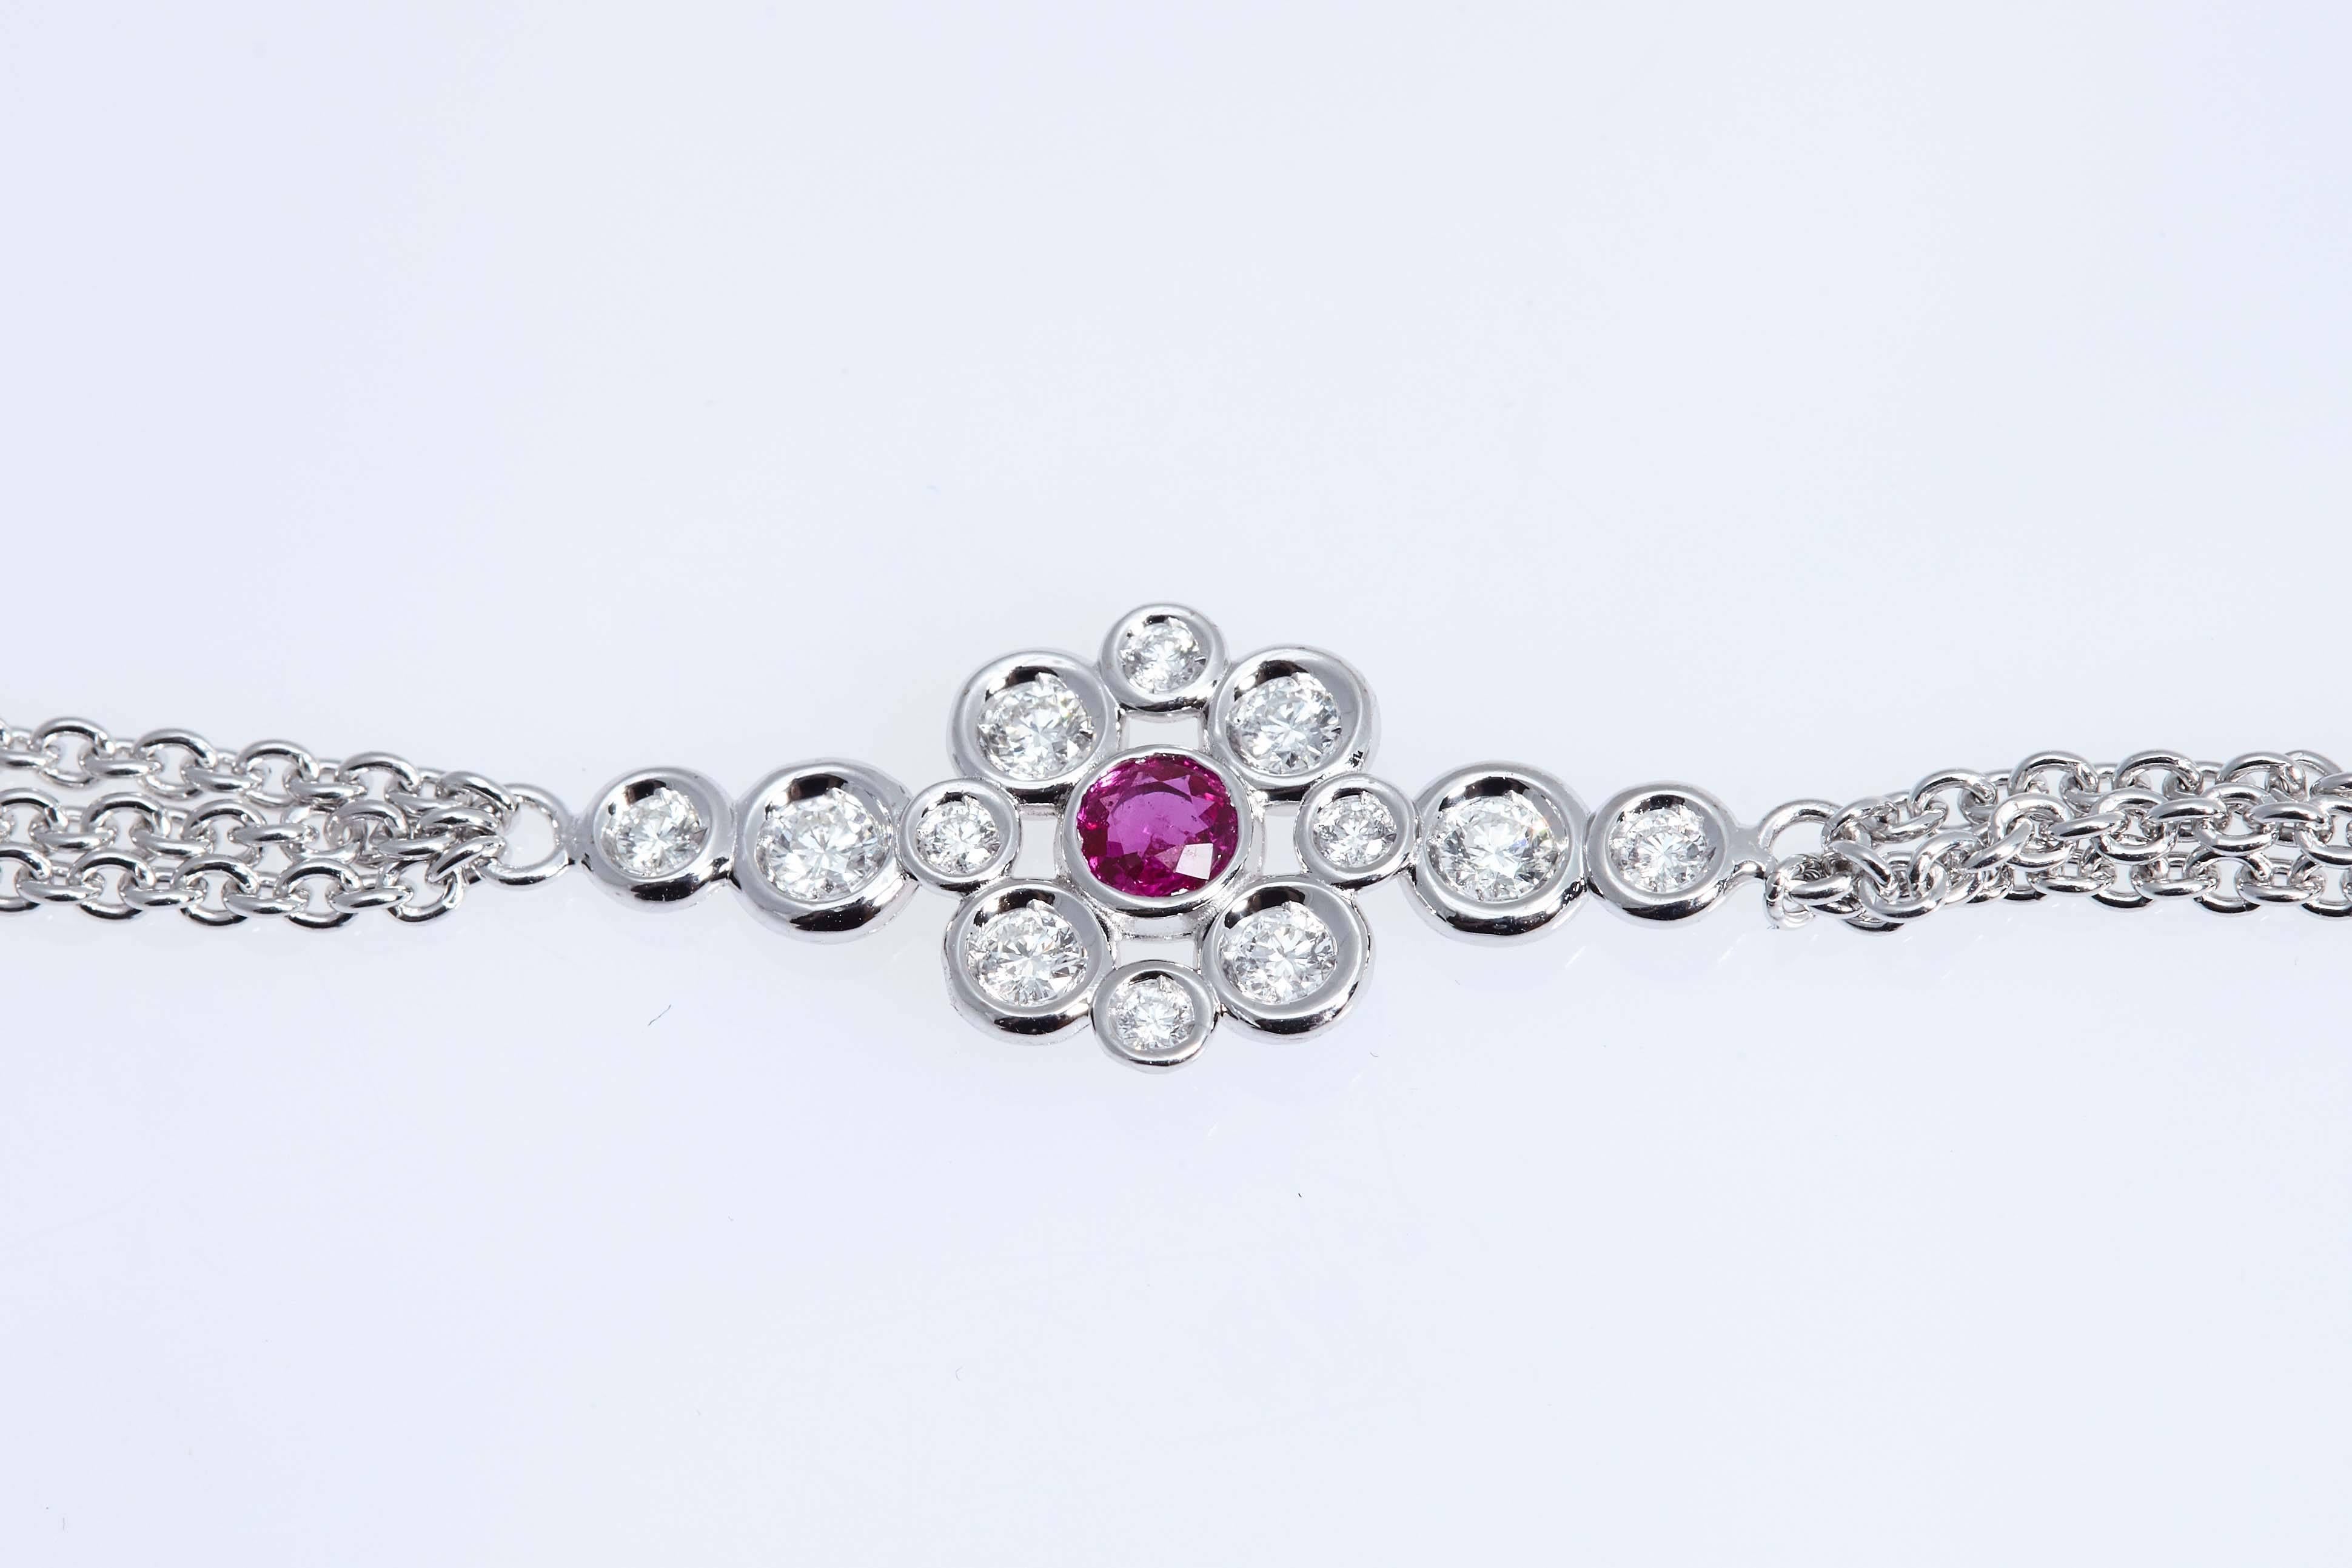 Eighteen karat white gold necklace made up eight flower motifs. Each motif has a ruby in the center surrounded by round diamonds. The necklace is 35 inches long and is made up of 105 round diamonds and 8 round rubies.